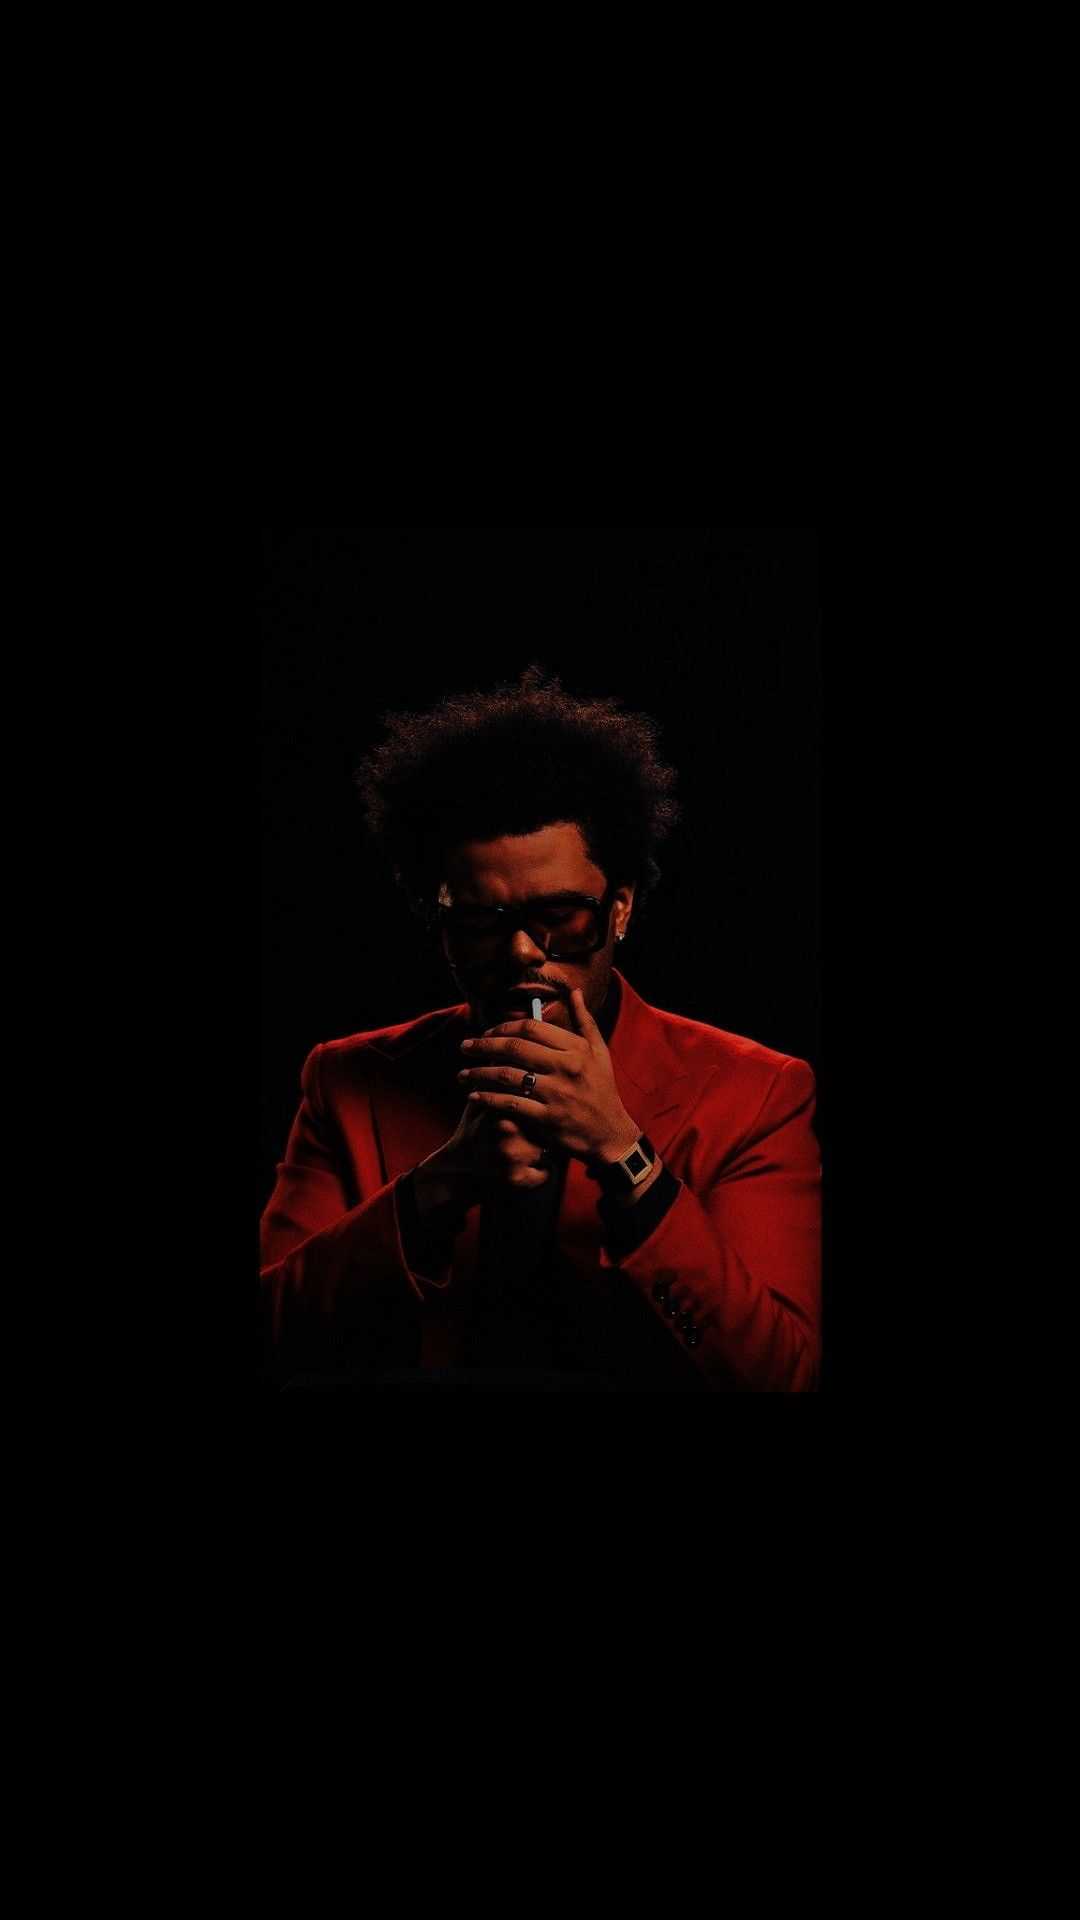 A man in red suit and sunglasses - The Weeknd